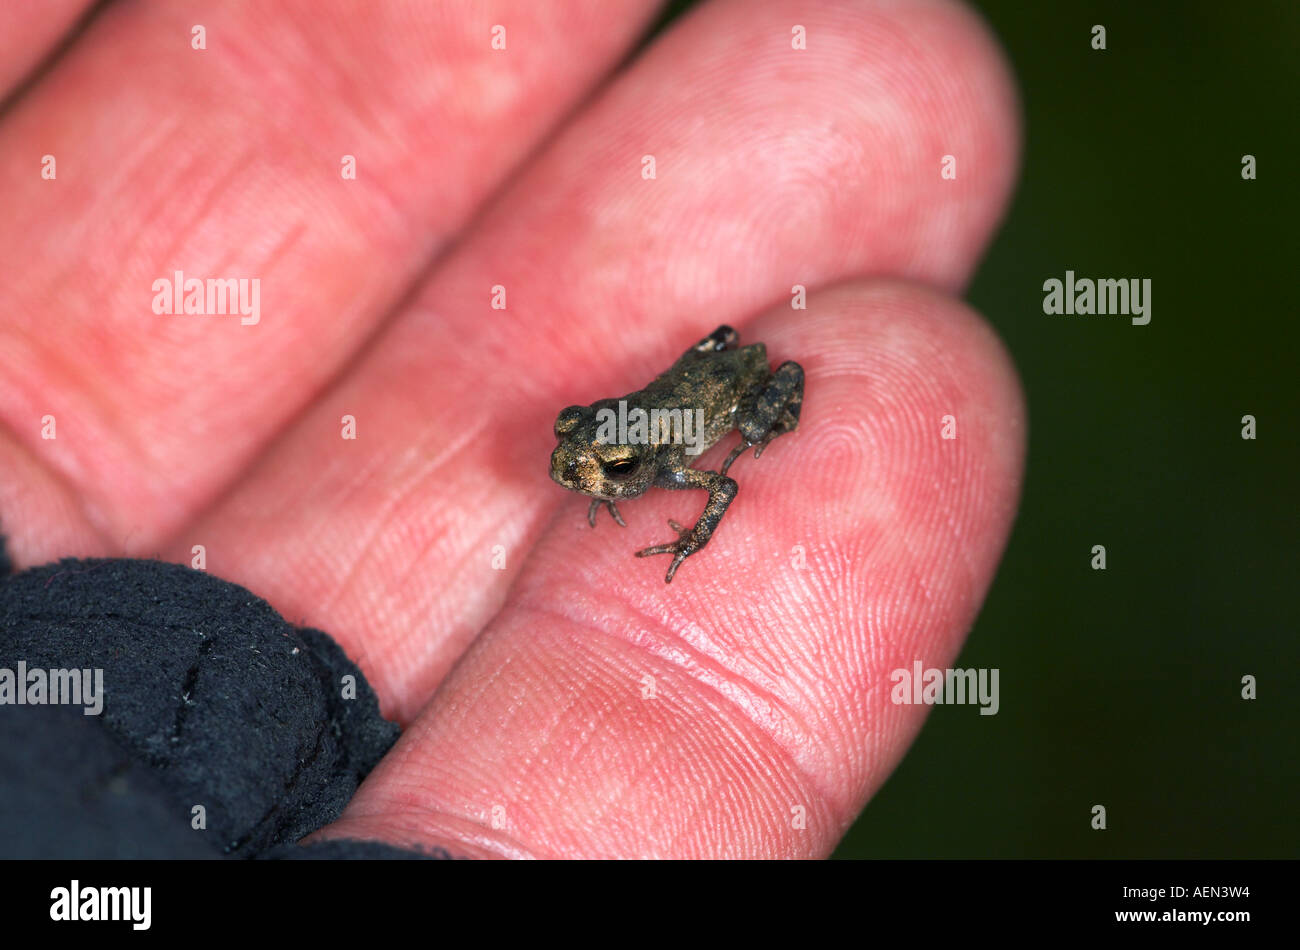 Baby frog on little finger of adult man's hand Stock Photo - Alamy